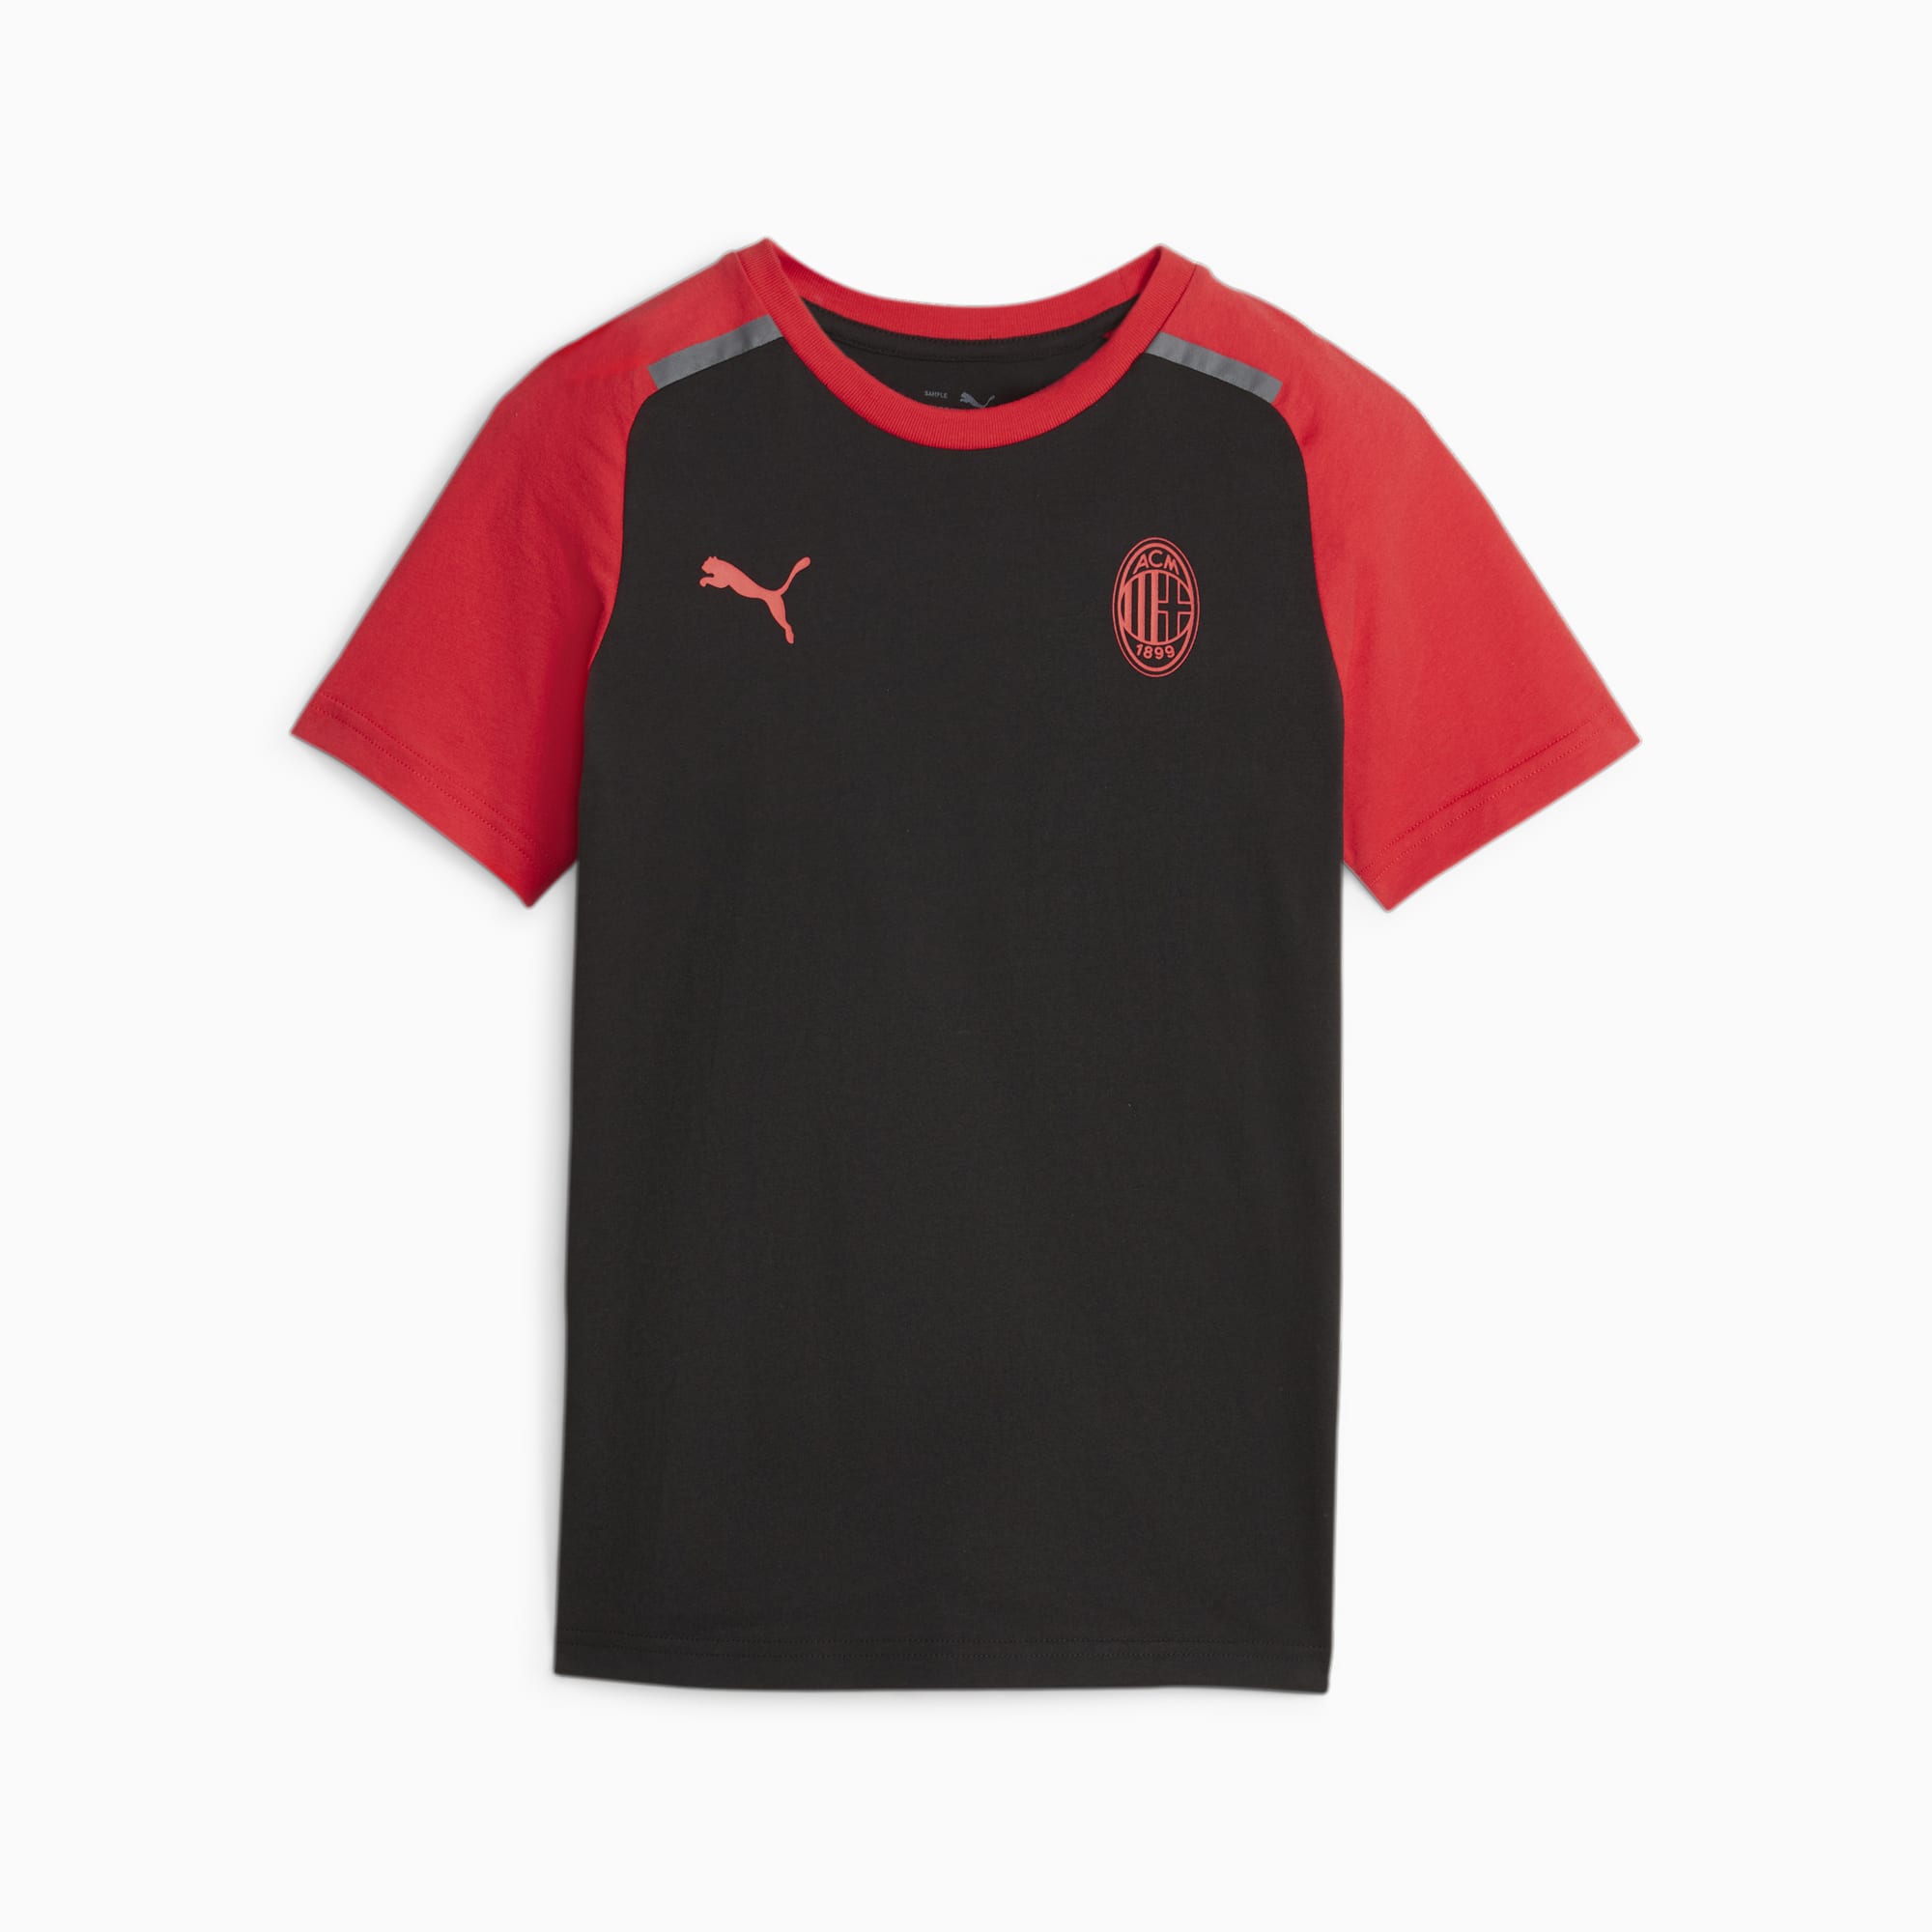 PUMA AC Milan Football Casuals Youth T-Shirt, Black/For All Time Red